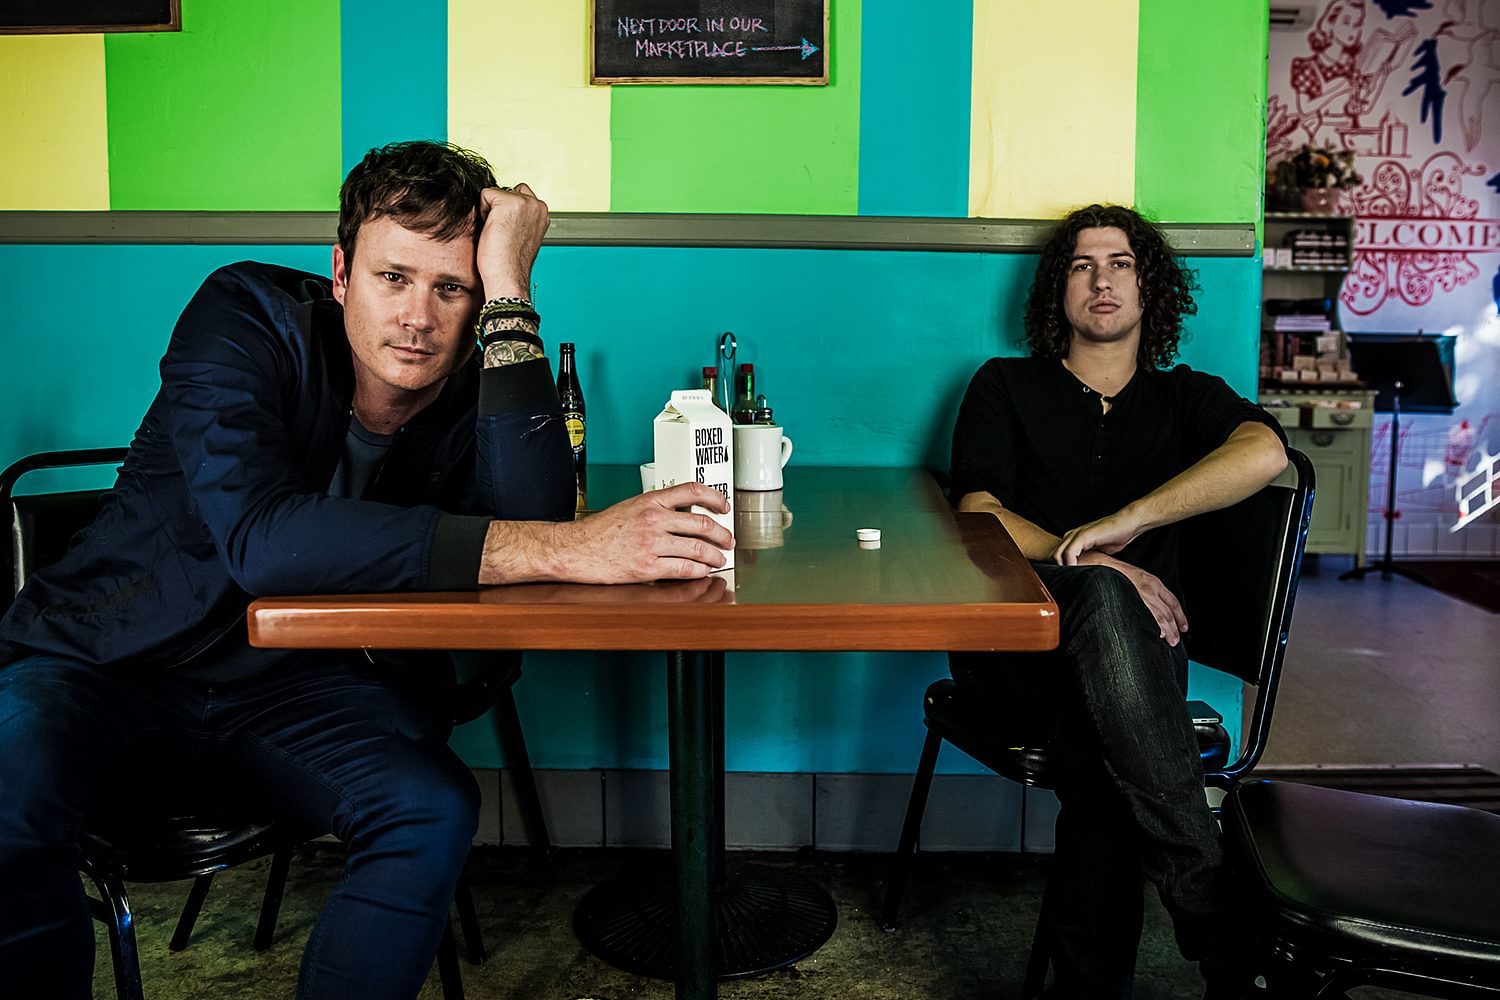 Angels and Airwaves: “The sum of the album’s parts will create a much bigger whole”